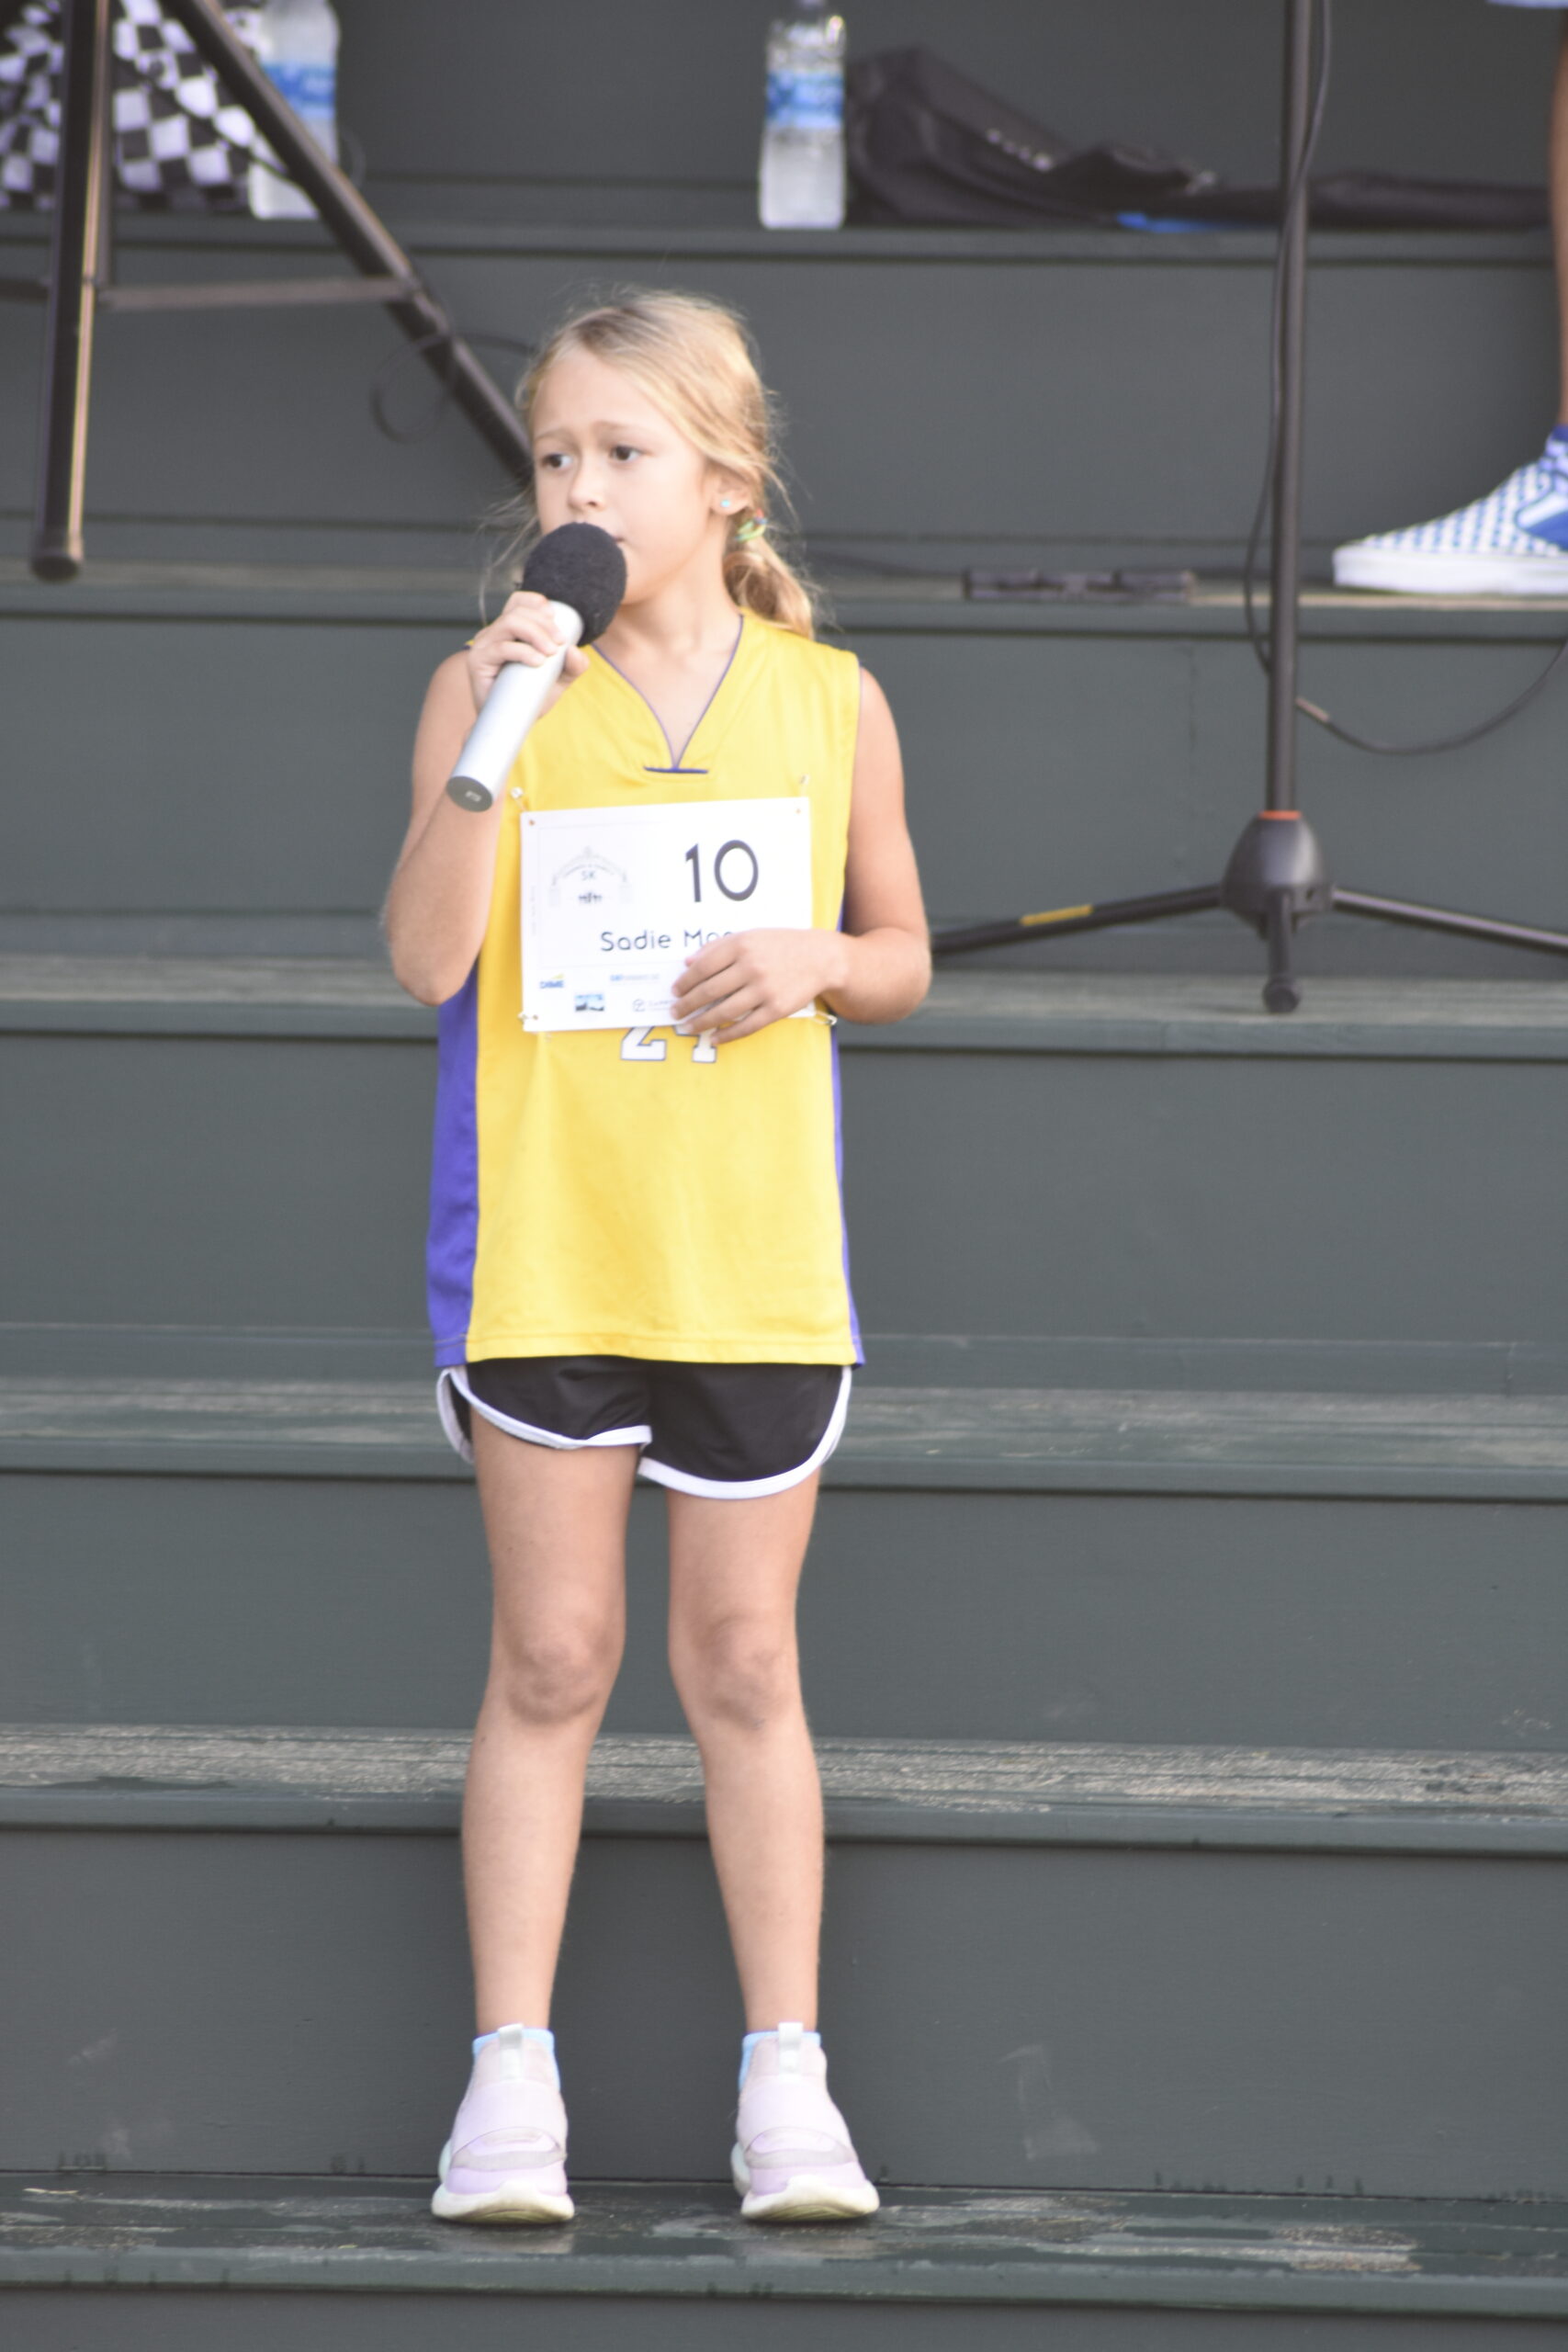 Sadie Finelli sang the national anthem on the steps of the newly renovated grandstands just prior to the second annual Mashashimuet Park Friends and Family 5K in Sag Harbor on Sunday morning.   DREW BUDD